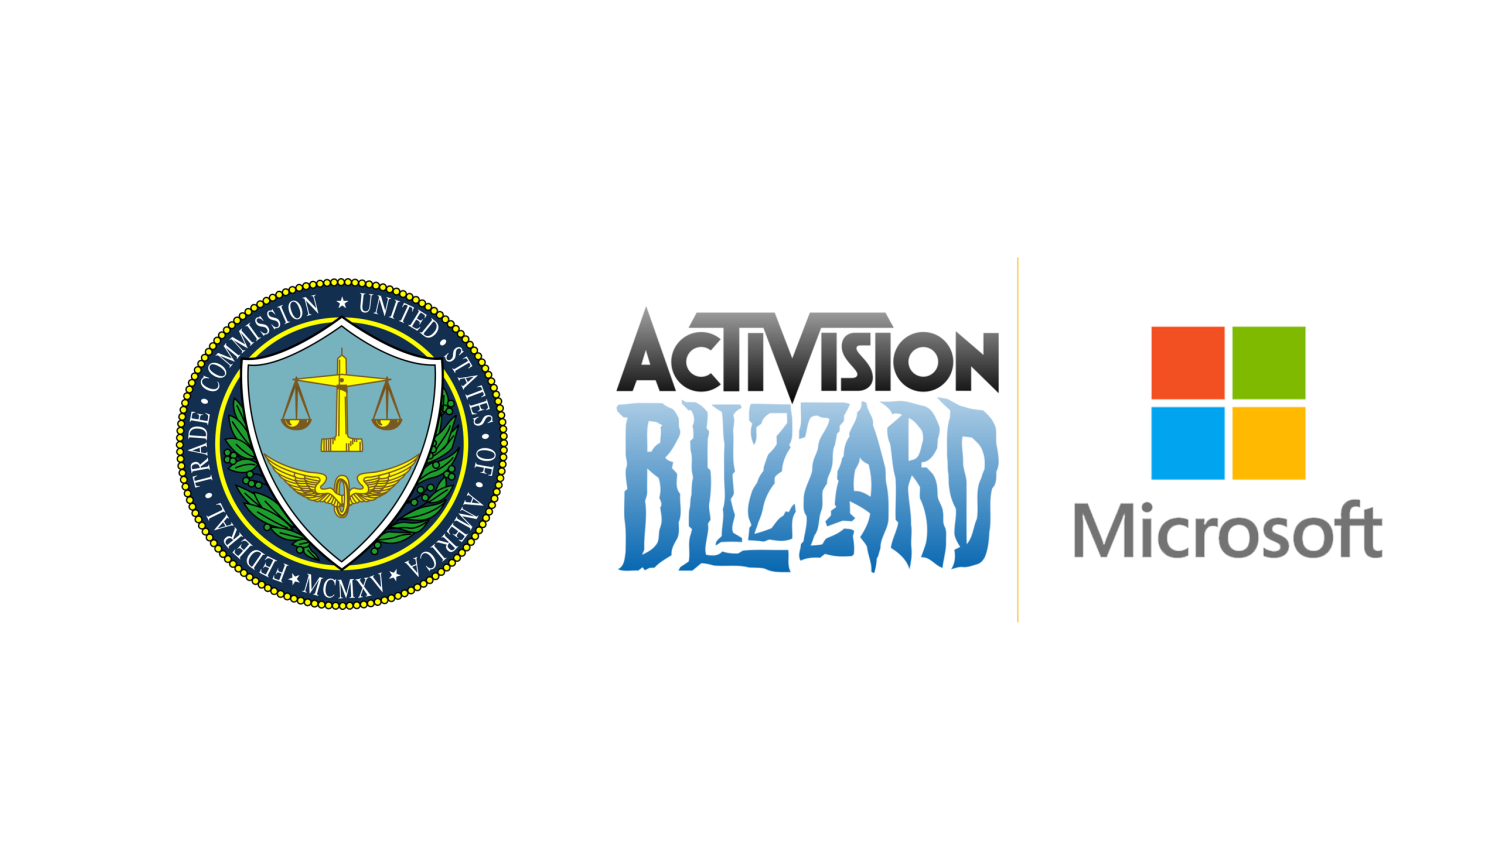 FTC, Microsoft spar in court over Activision deal - POLITICO